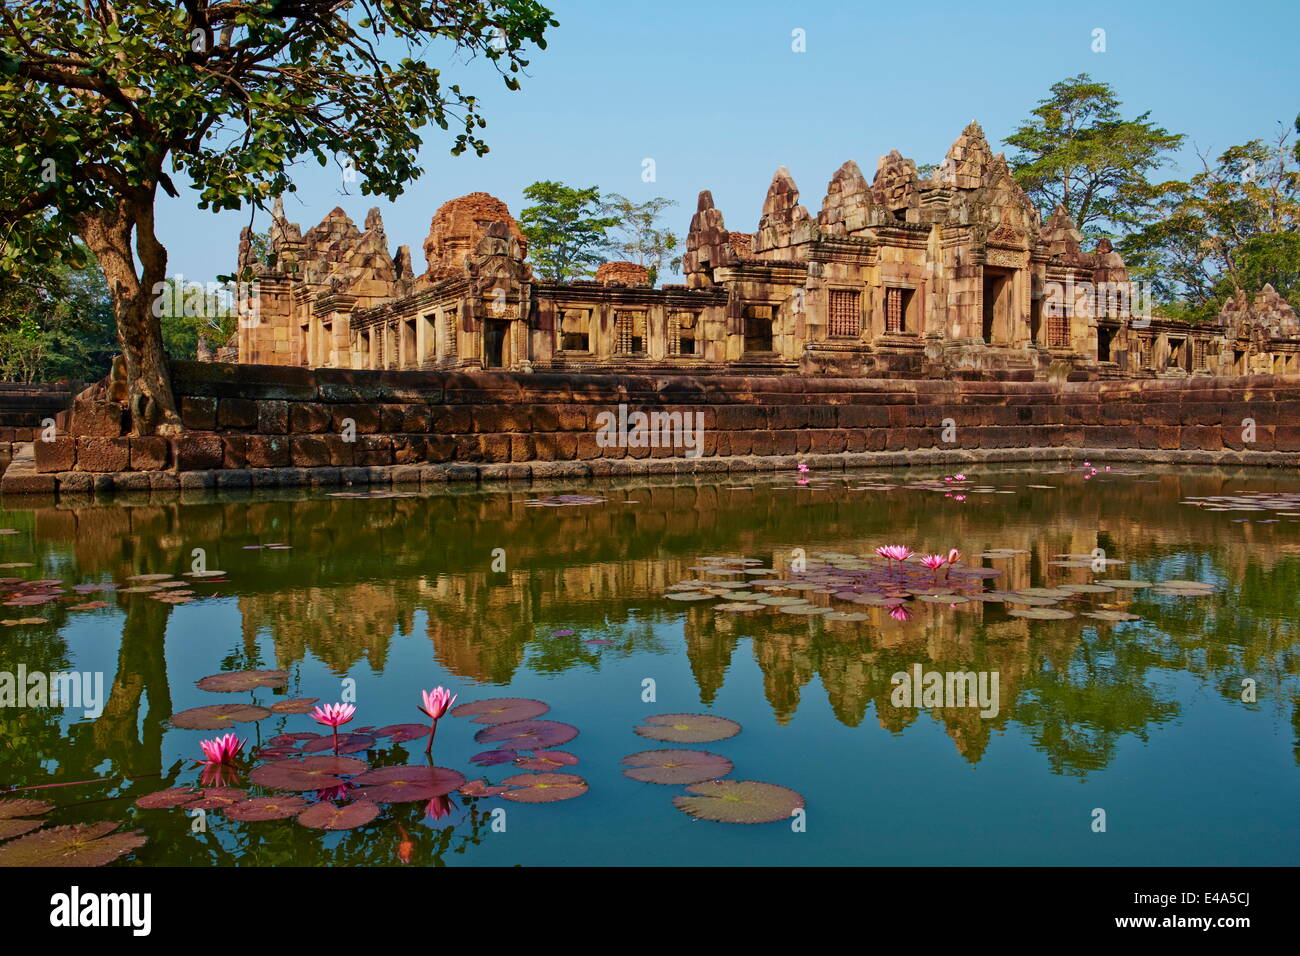 Muang Tham Temple, Khmer temple from period and style of Angkor, Buriram Province, Thailand, Southeast Asia, Asia Stock Photo